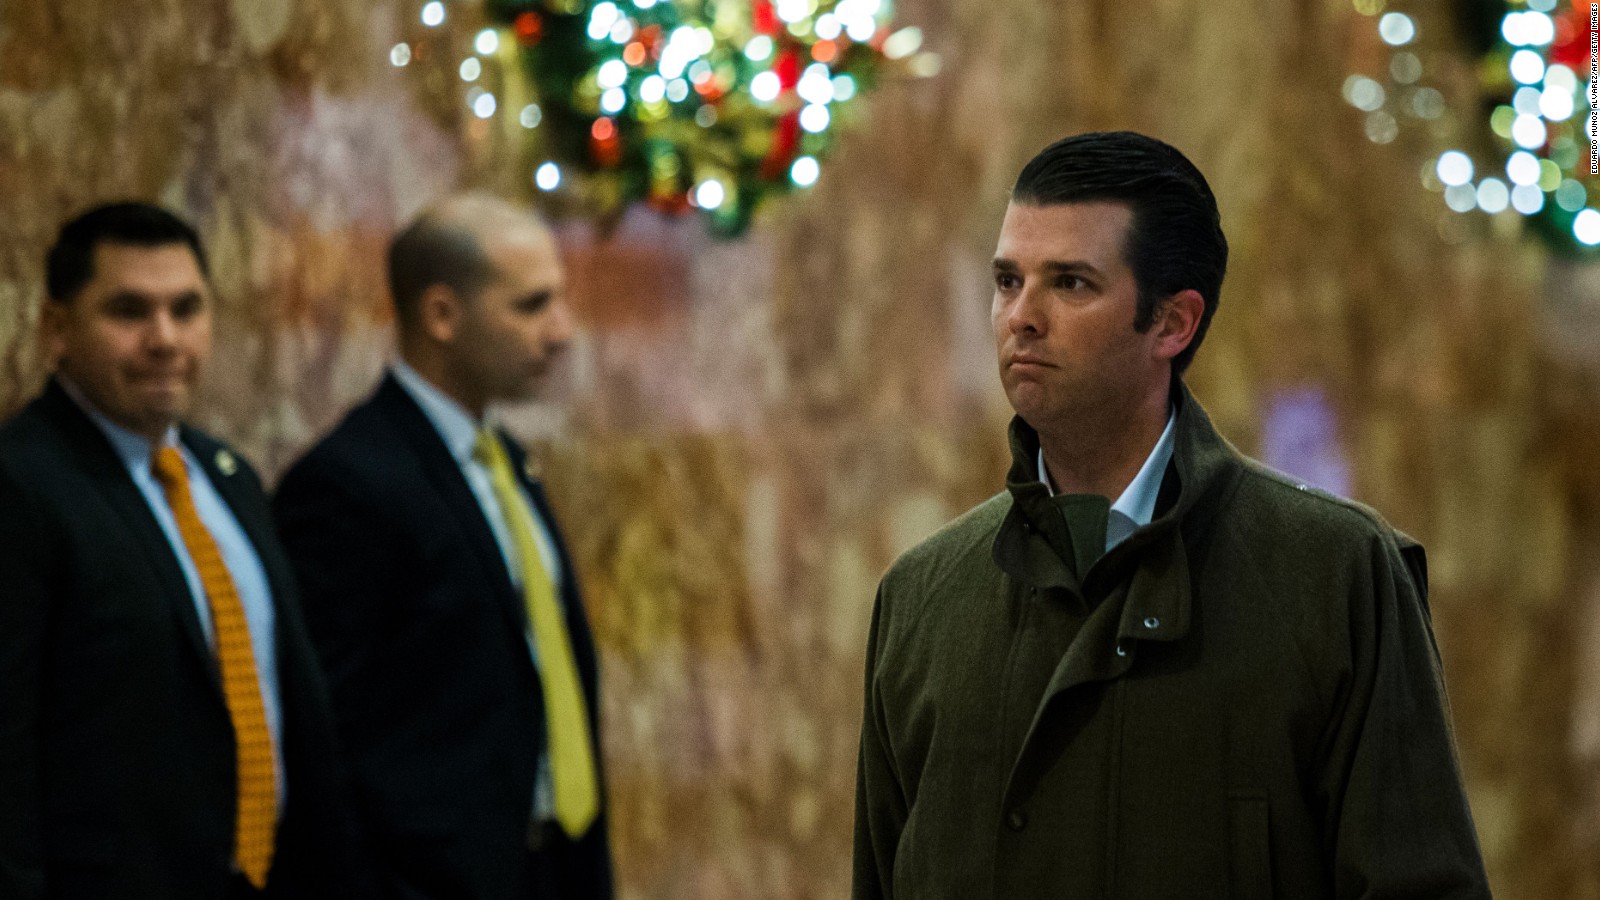 Trump Jr.: I'm not worried about going to jail - CNN Video